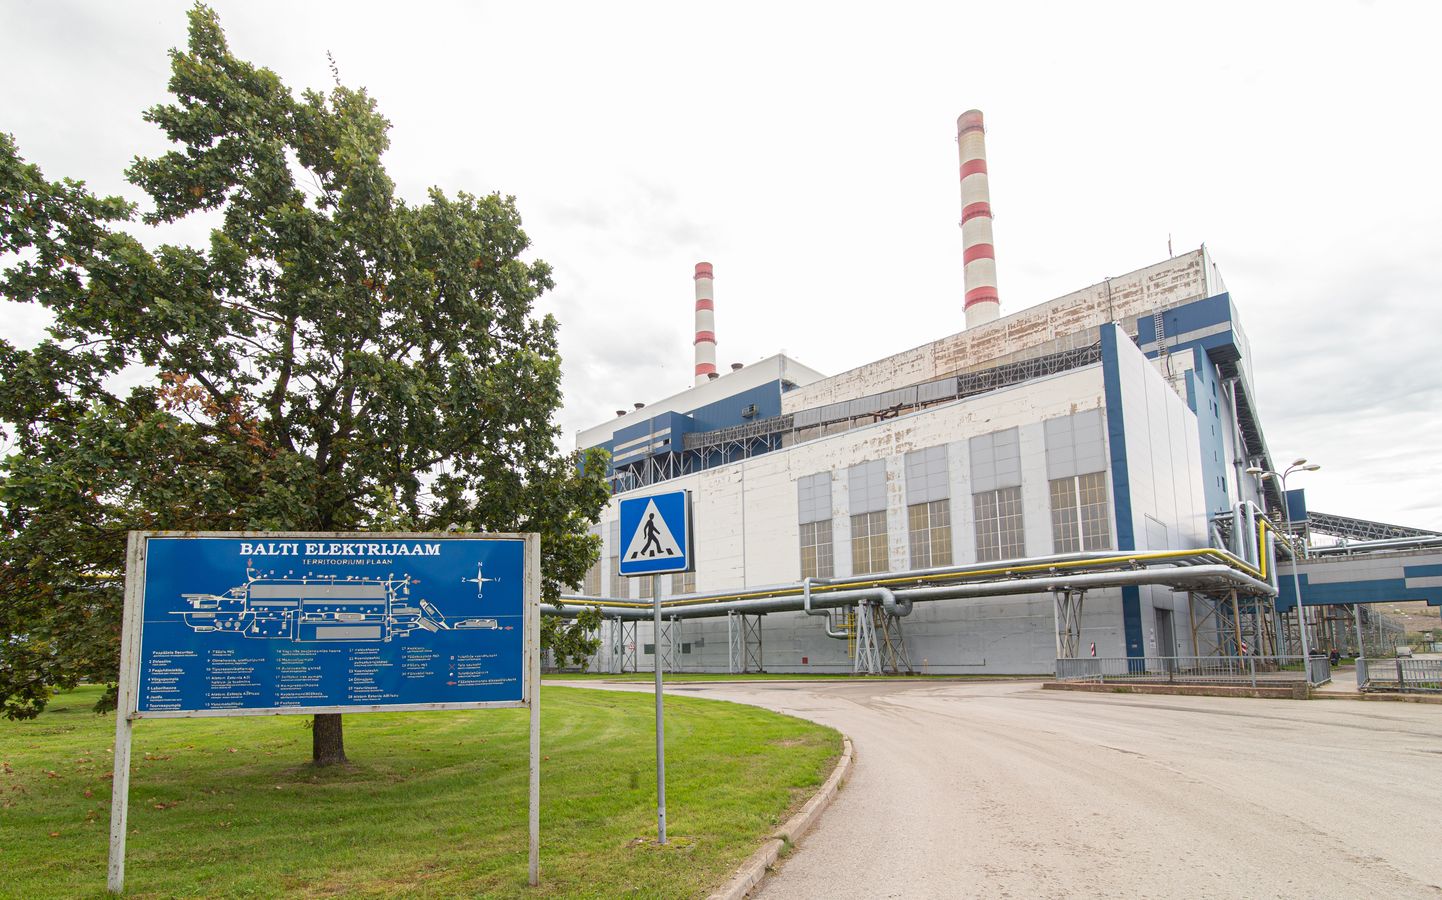 Room heat in Narva comes from the Balti power station.